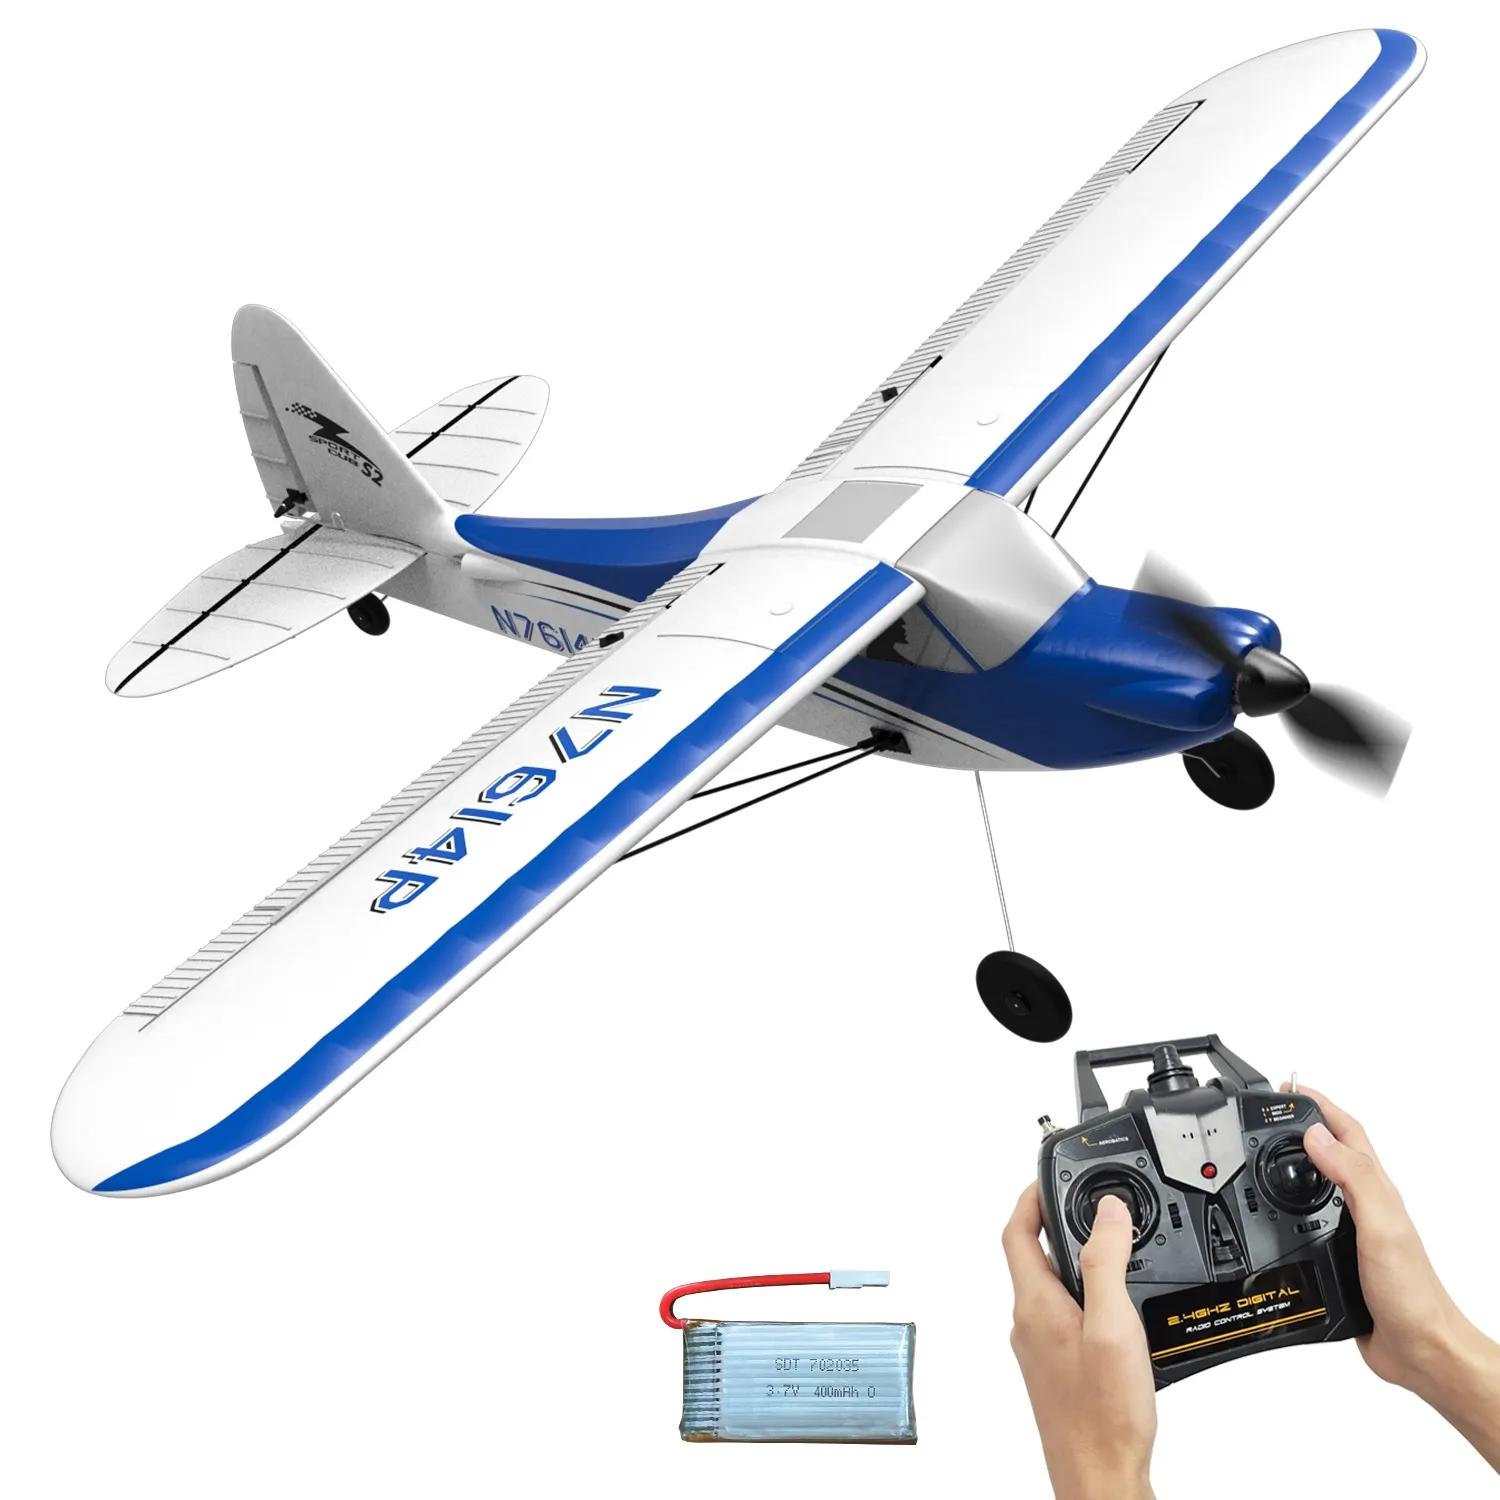 Remote Control Aeroplanes For Sale: Types of remote control aeroplanes for sale include gliders, trainers, sport planes, and scale models.